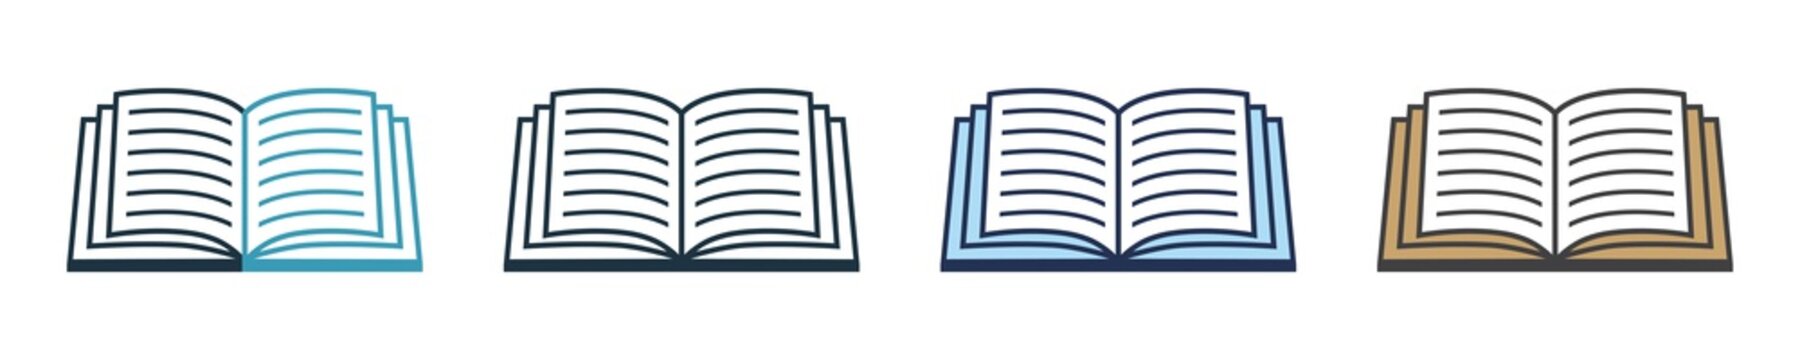 book icon vector, Book logo in line style	
different style vector illustration.